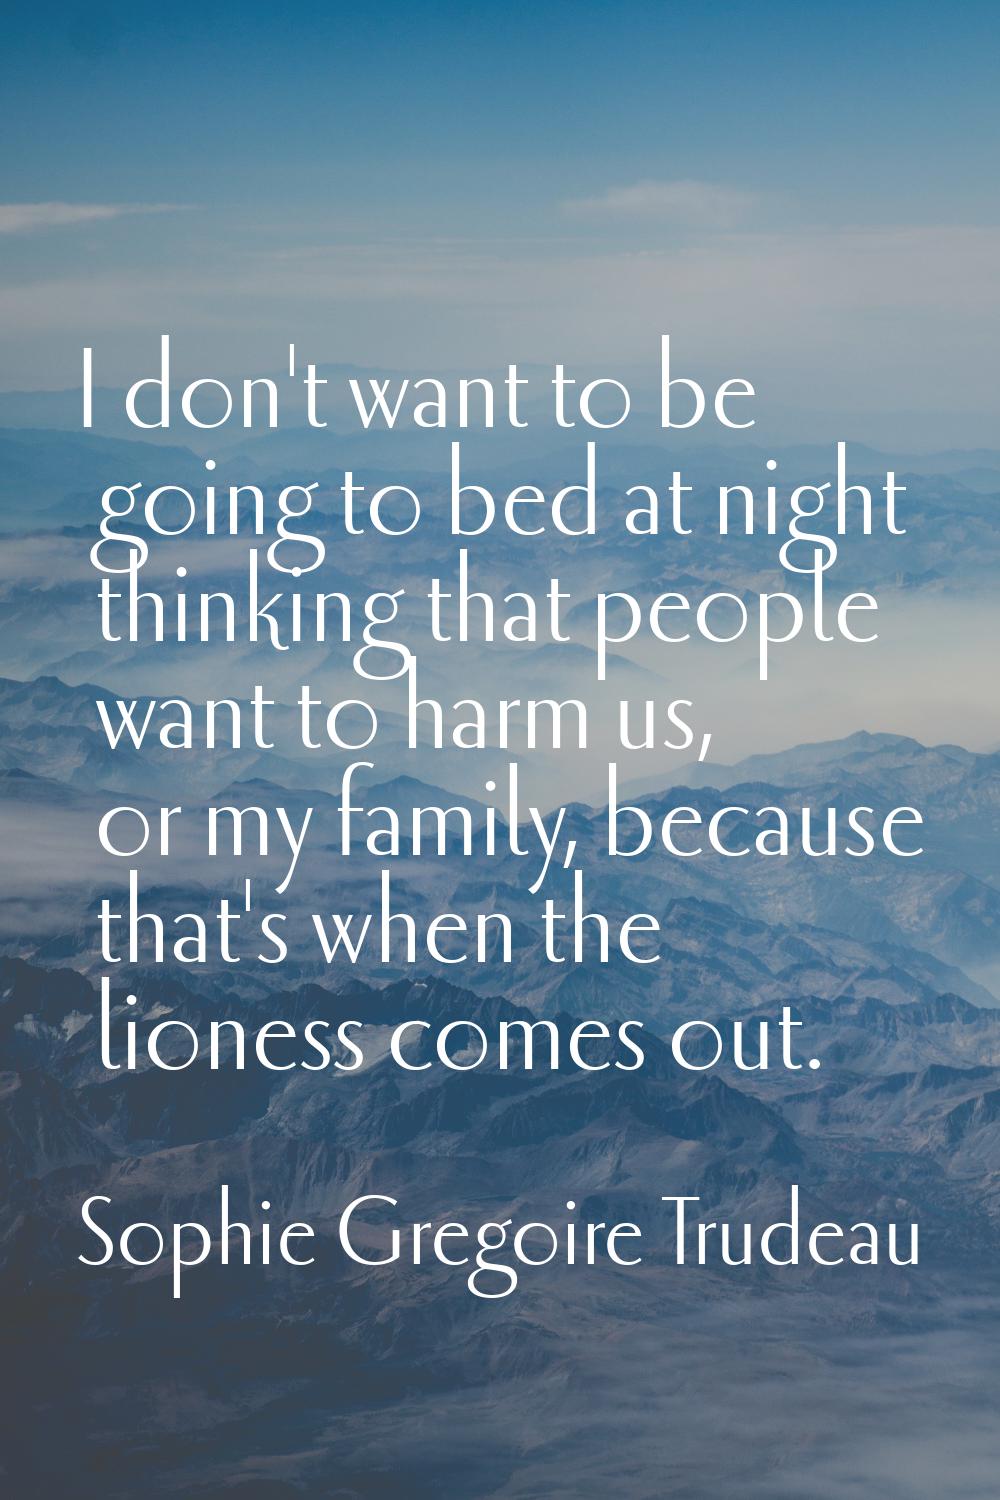 I don't want to be going to bed at night thinking that people want to harm us, or my family, becaus